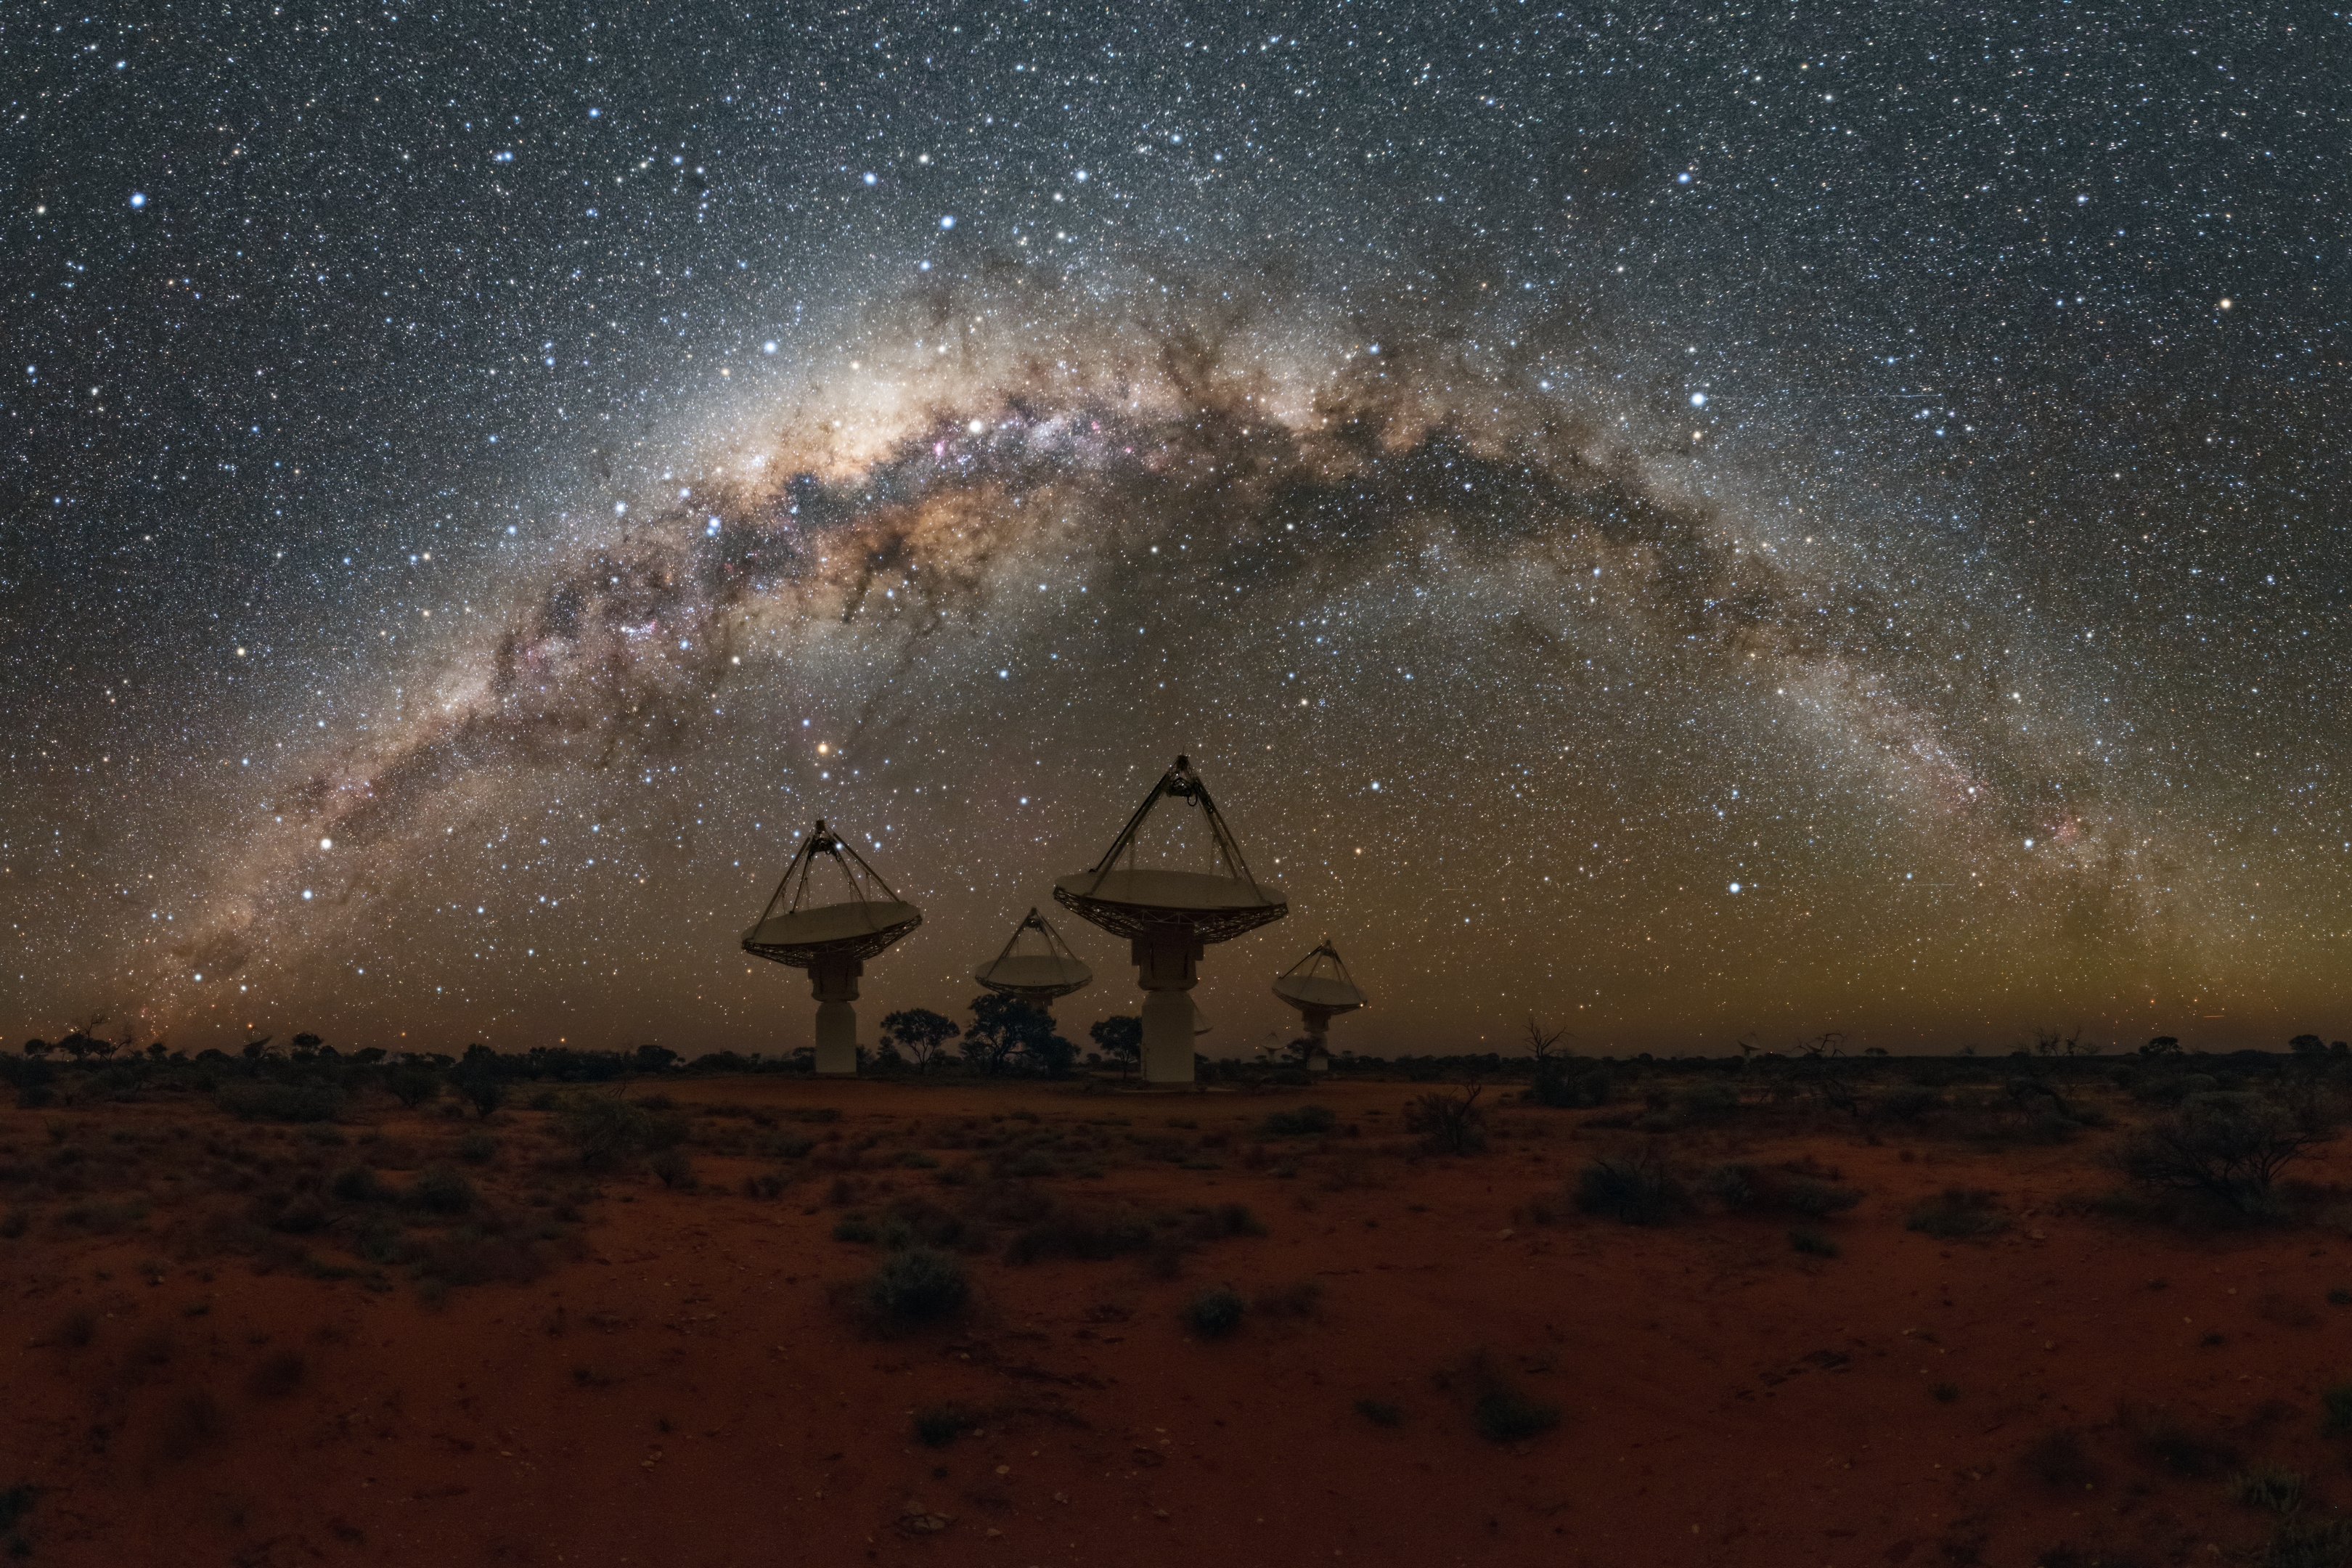 telescope dishes in an open outback landscape with the milky way above